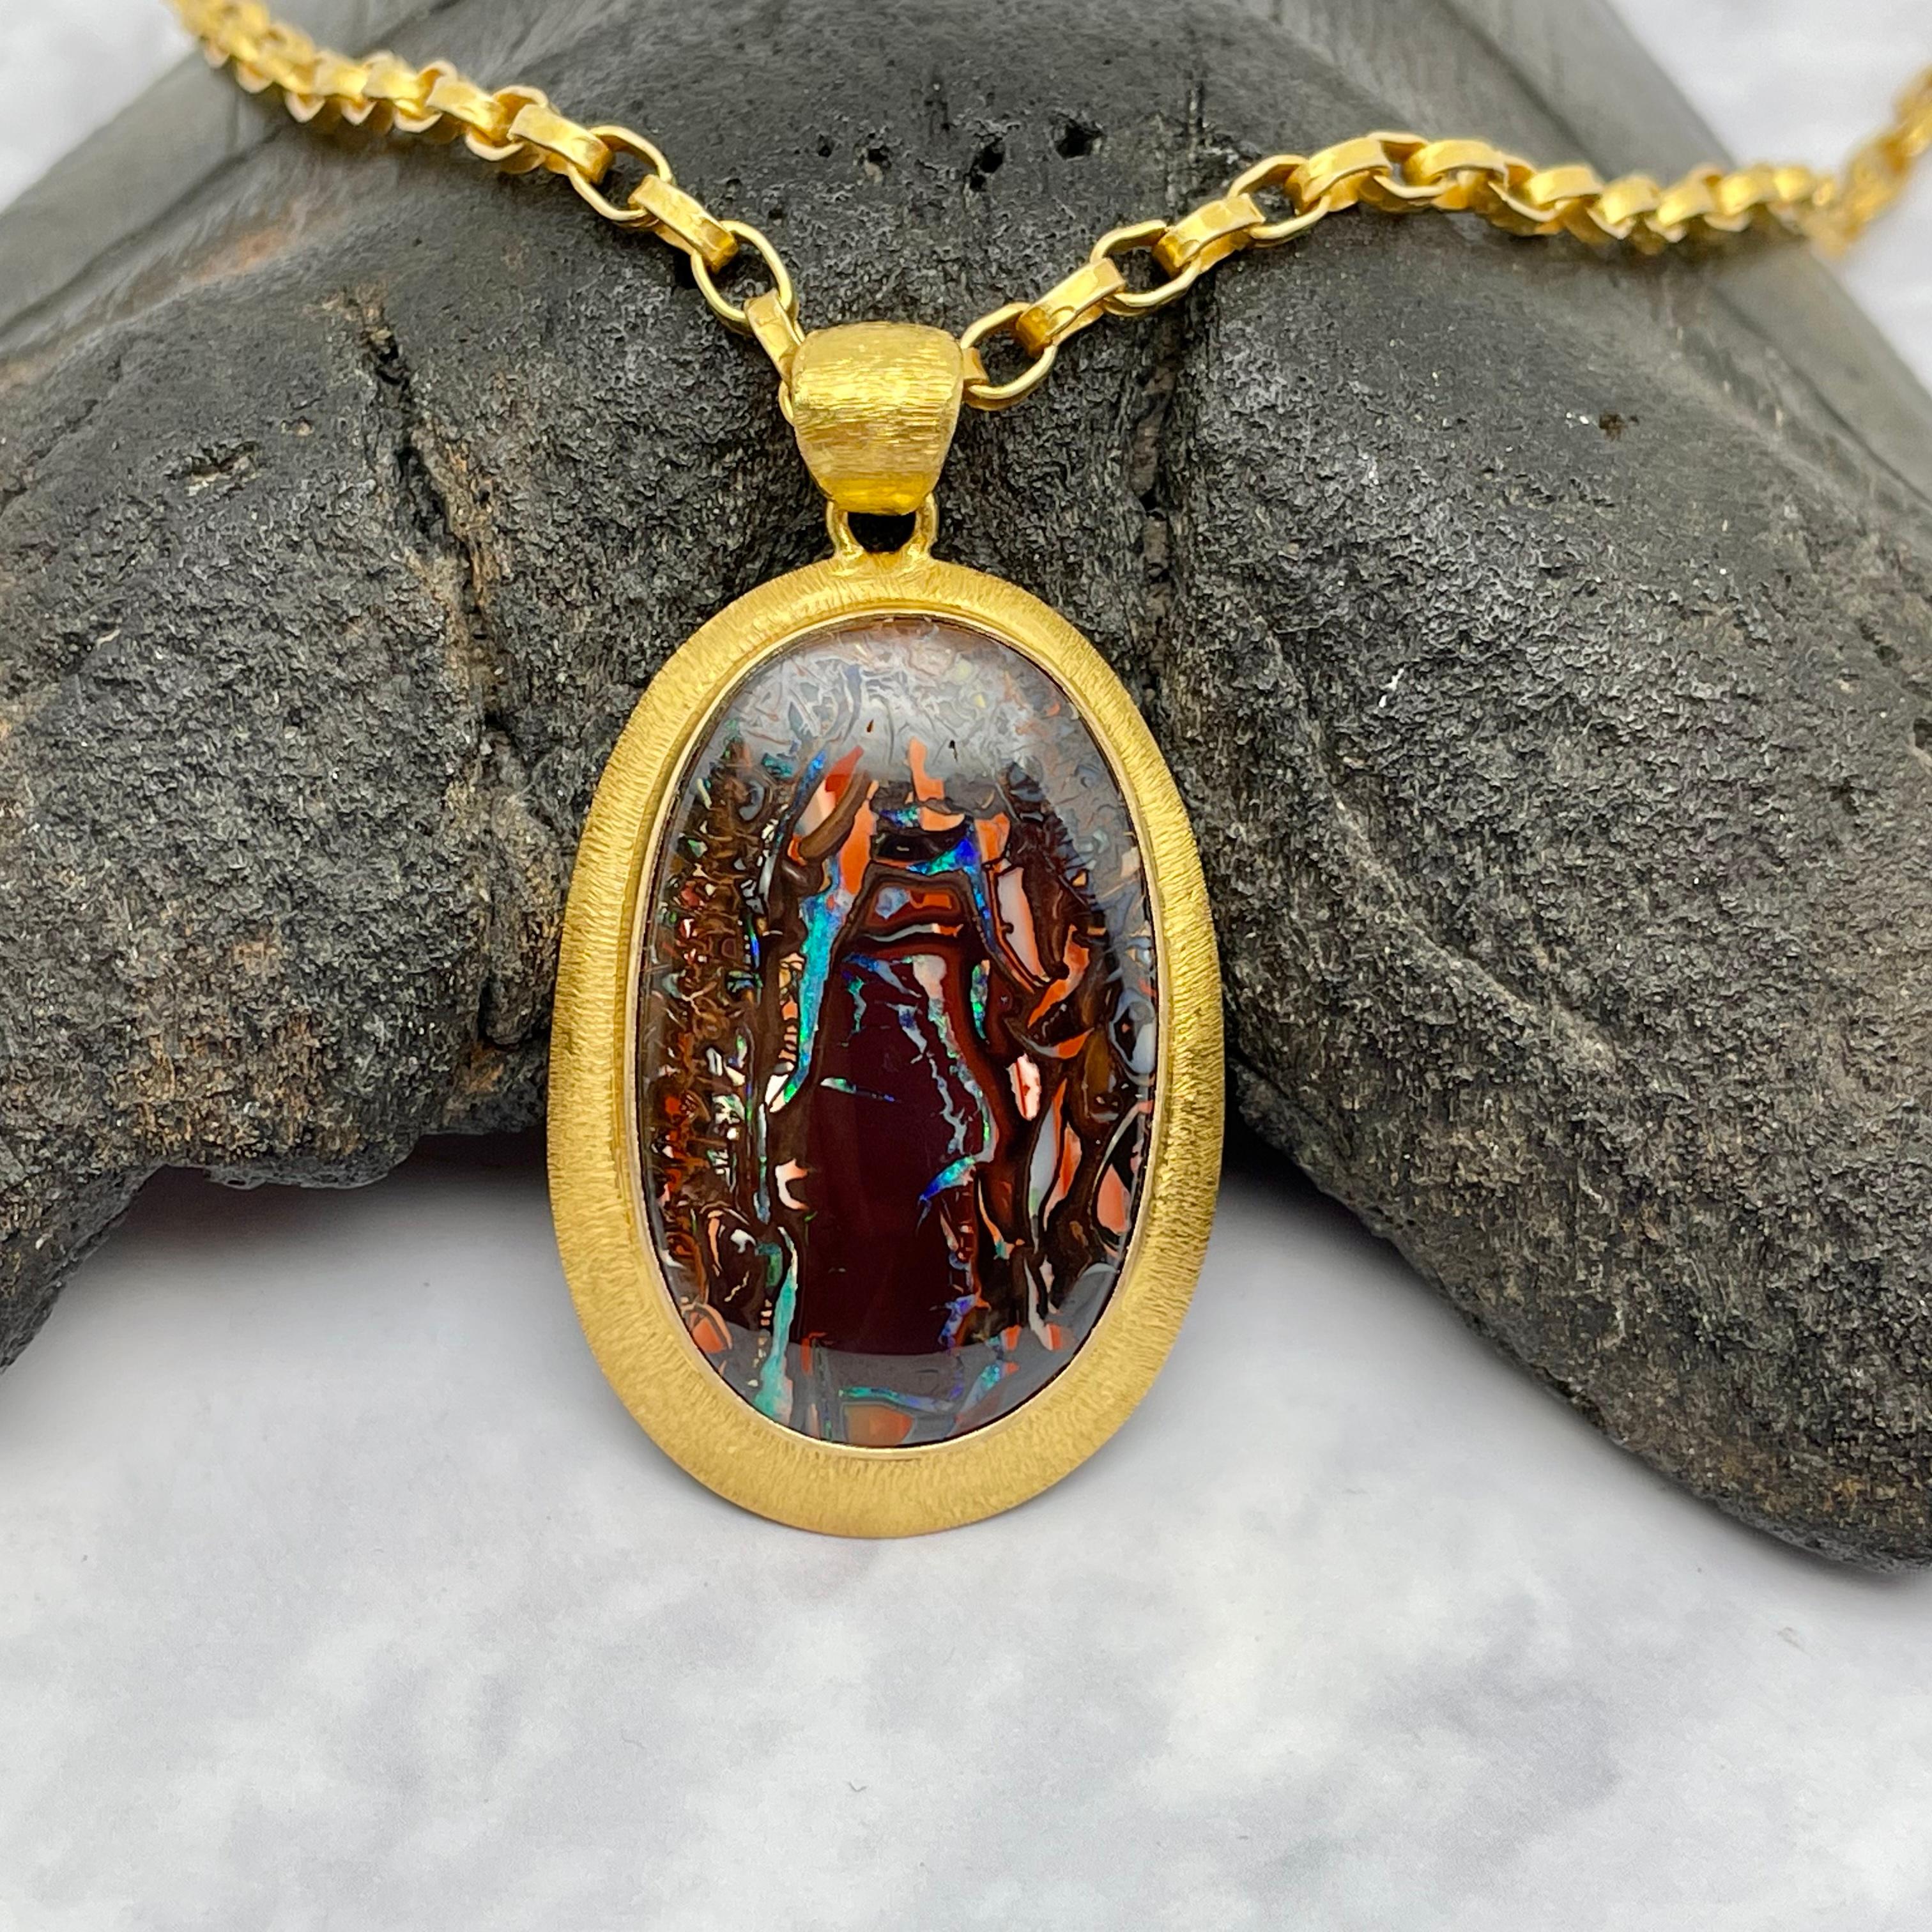 A nice 18 x 29 mm oval harlequin Koroit boulder opal with nearly every rainbow color displayed is highlighted in a double line texture handmade 18K gold setting with similar wide bail.  Koroit opal comes from an opal mining area in Paroo Shire in